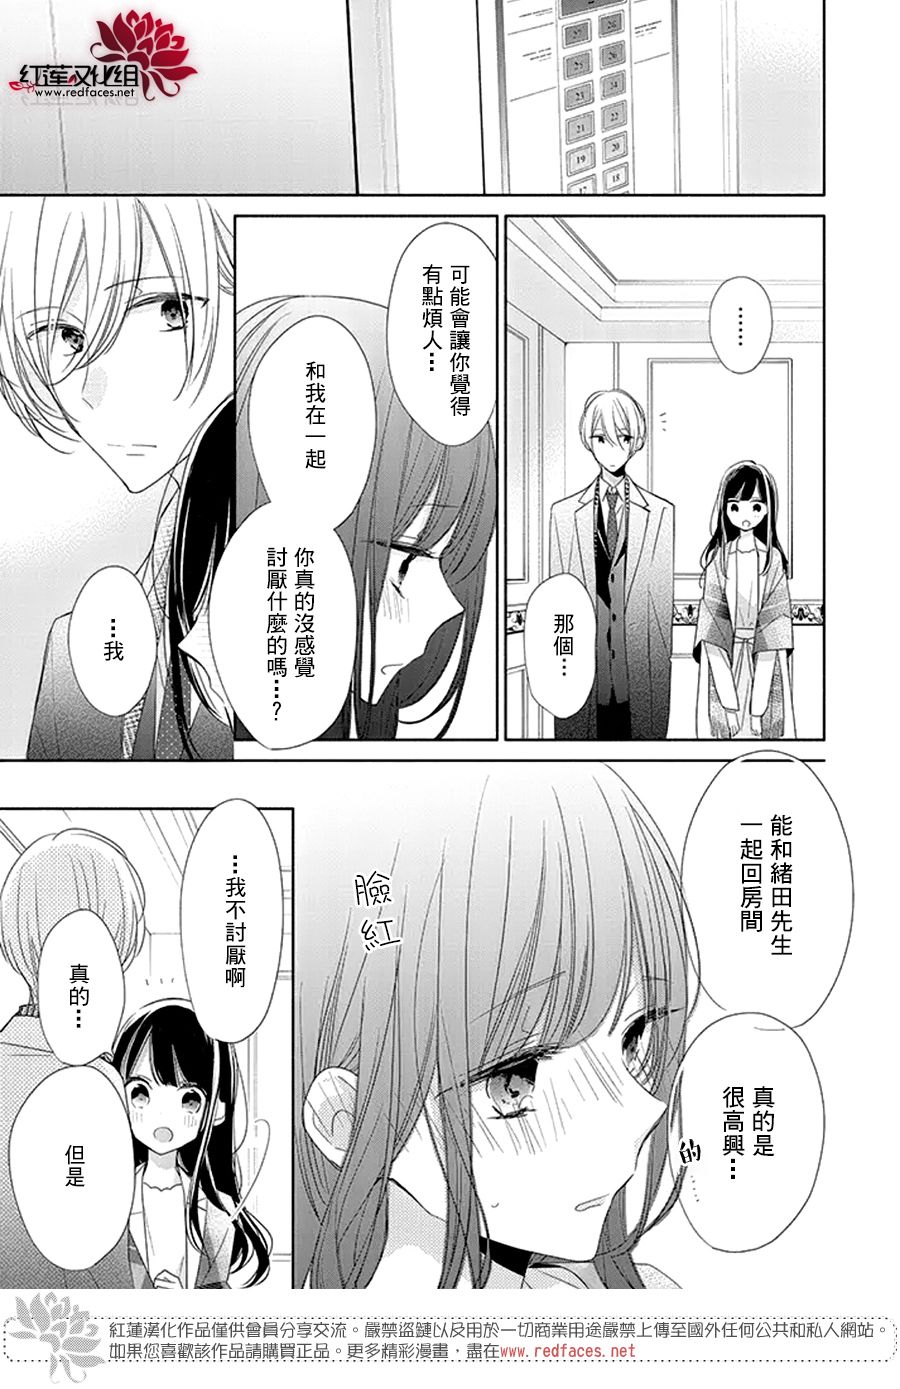 If given a second chance - 21話 - 3